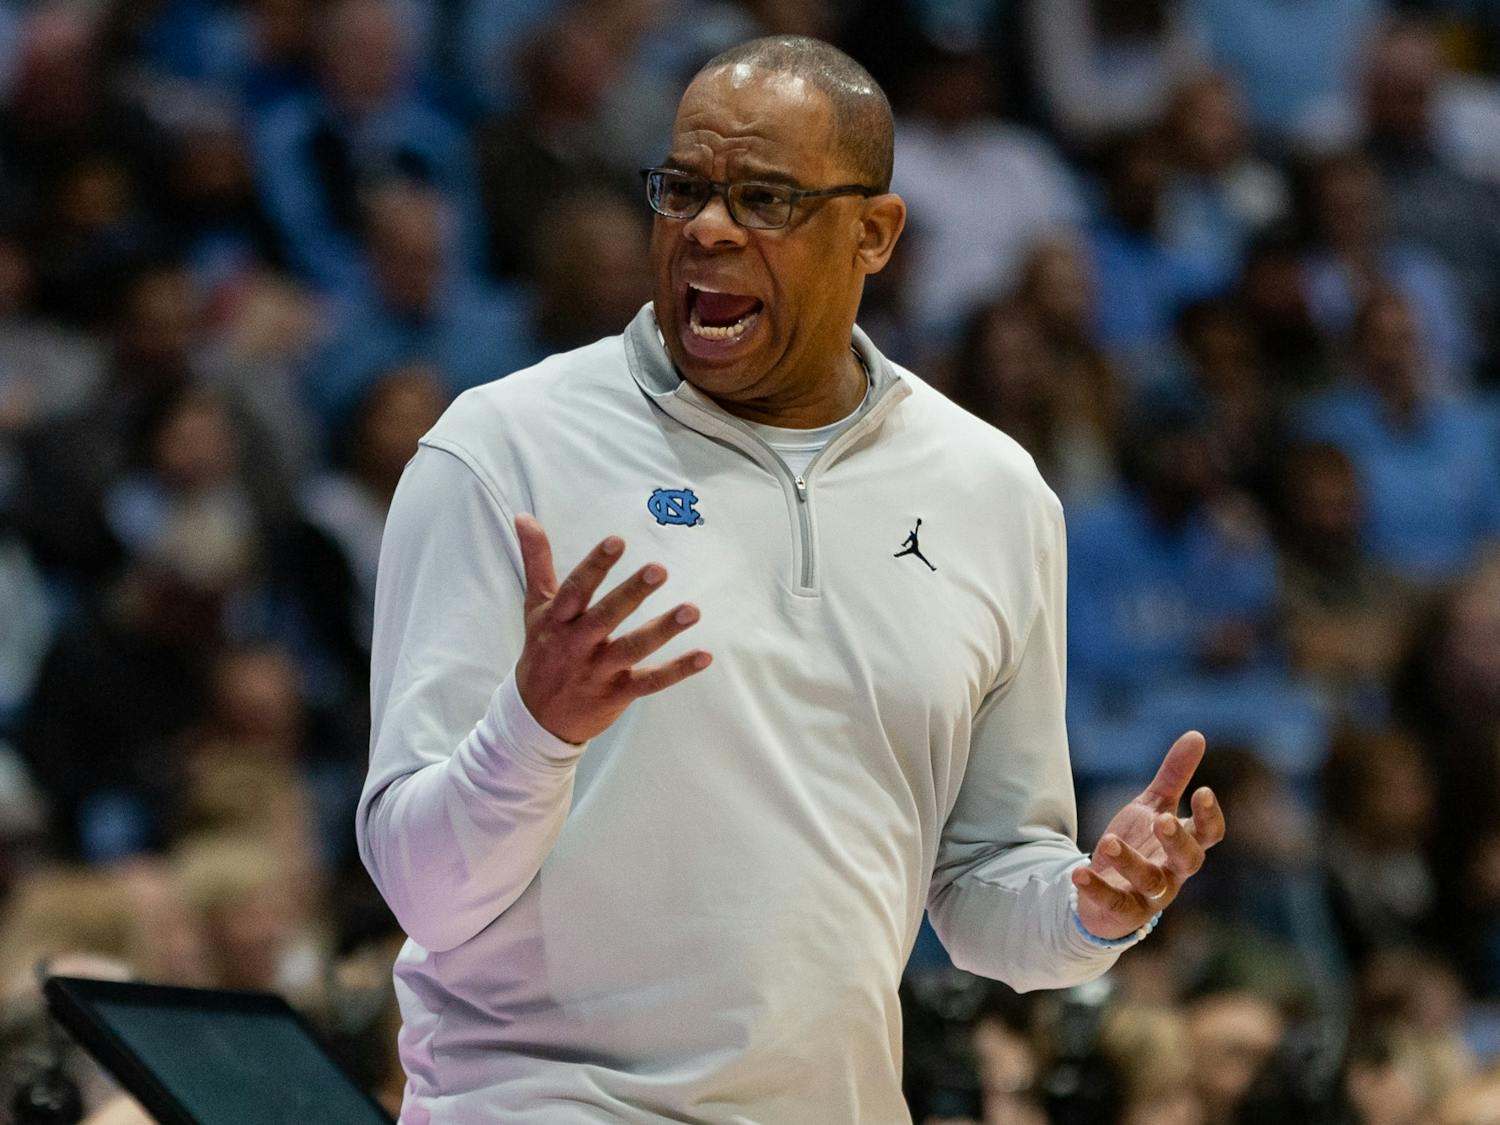 UNC head coach Hubert Davis questions a referee call during the men's basketball game against The Citadel at the Dean Smith Center on Tuesday, Dec. 13, 2022. UNC beat The Citadel 100-67.